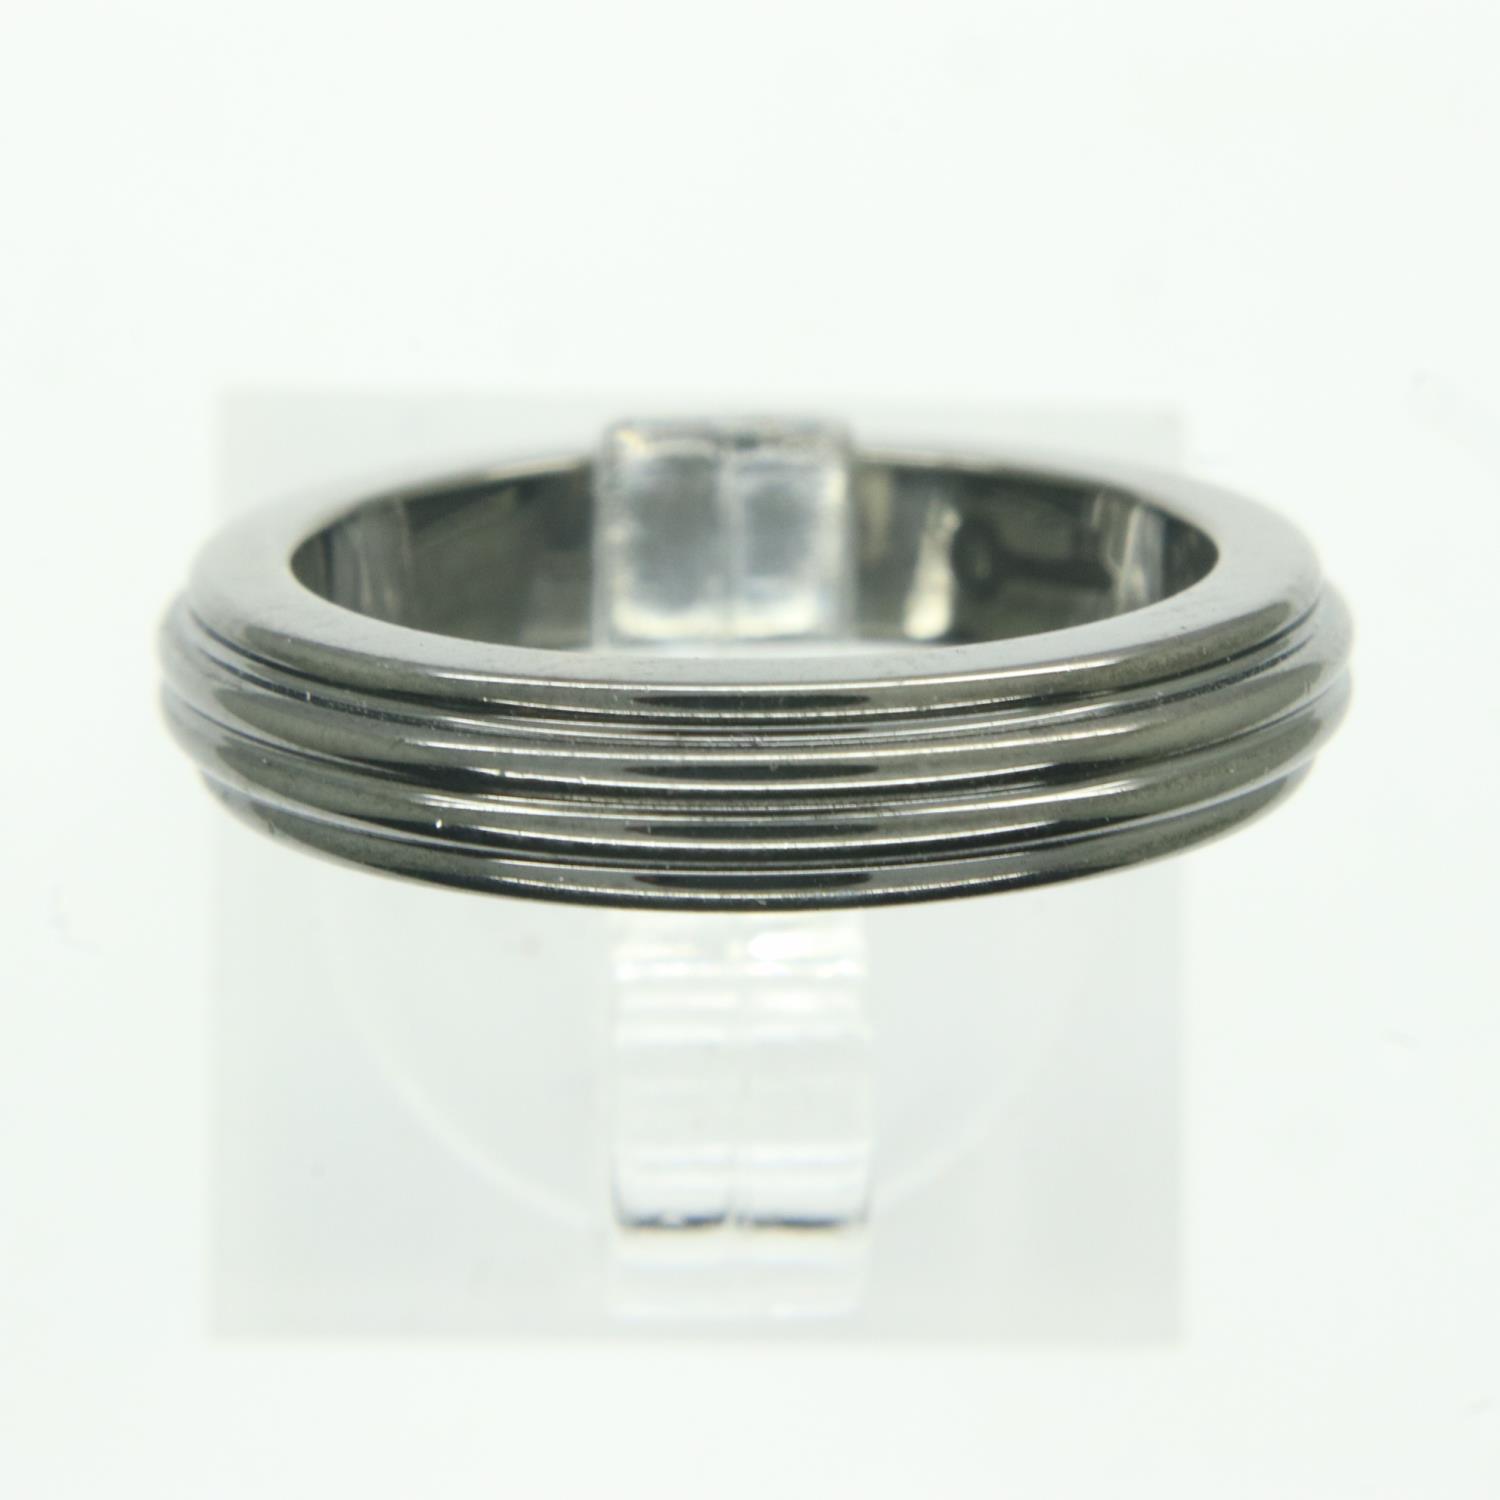 Theo Fennell oxidized silver band, size K. UK P&P Group 0 (£6+VAT for the first lot and £1+VAT for